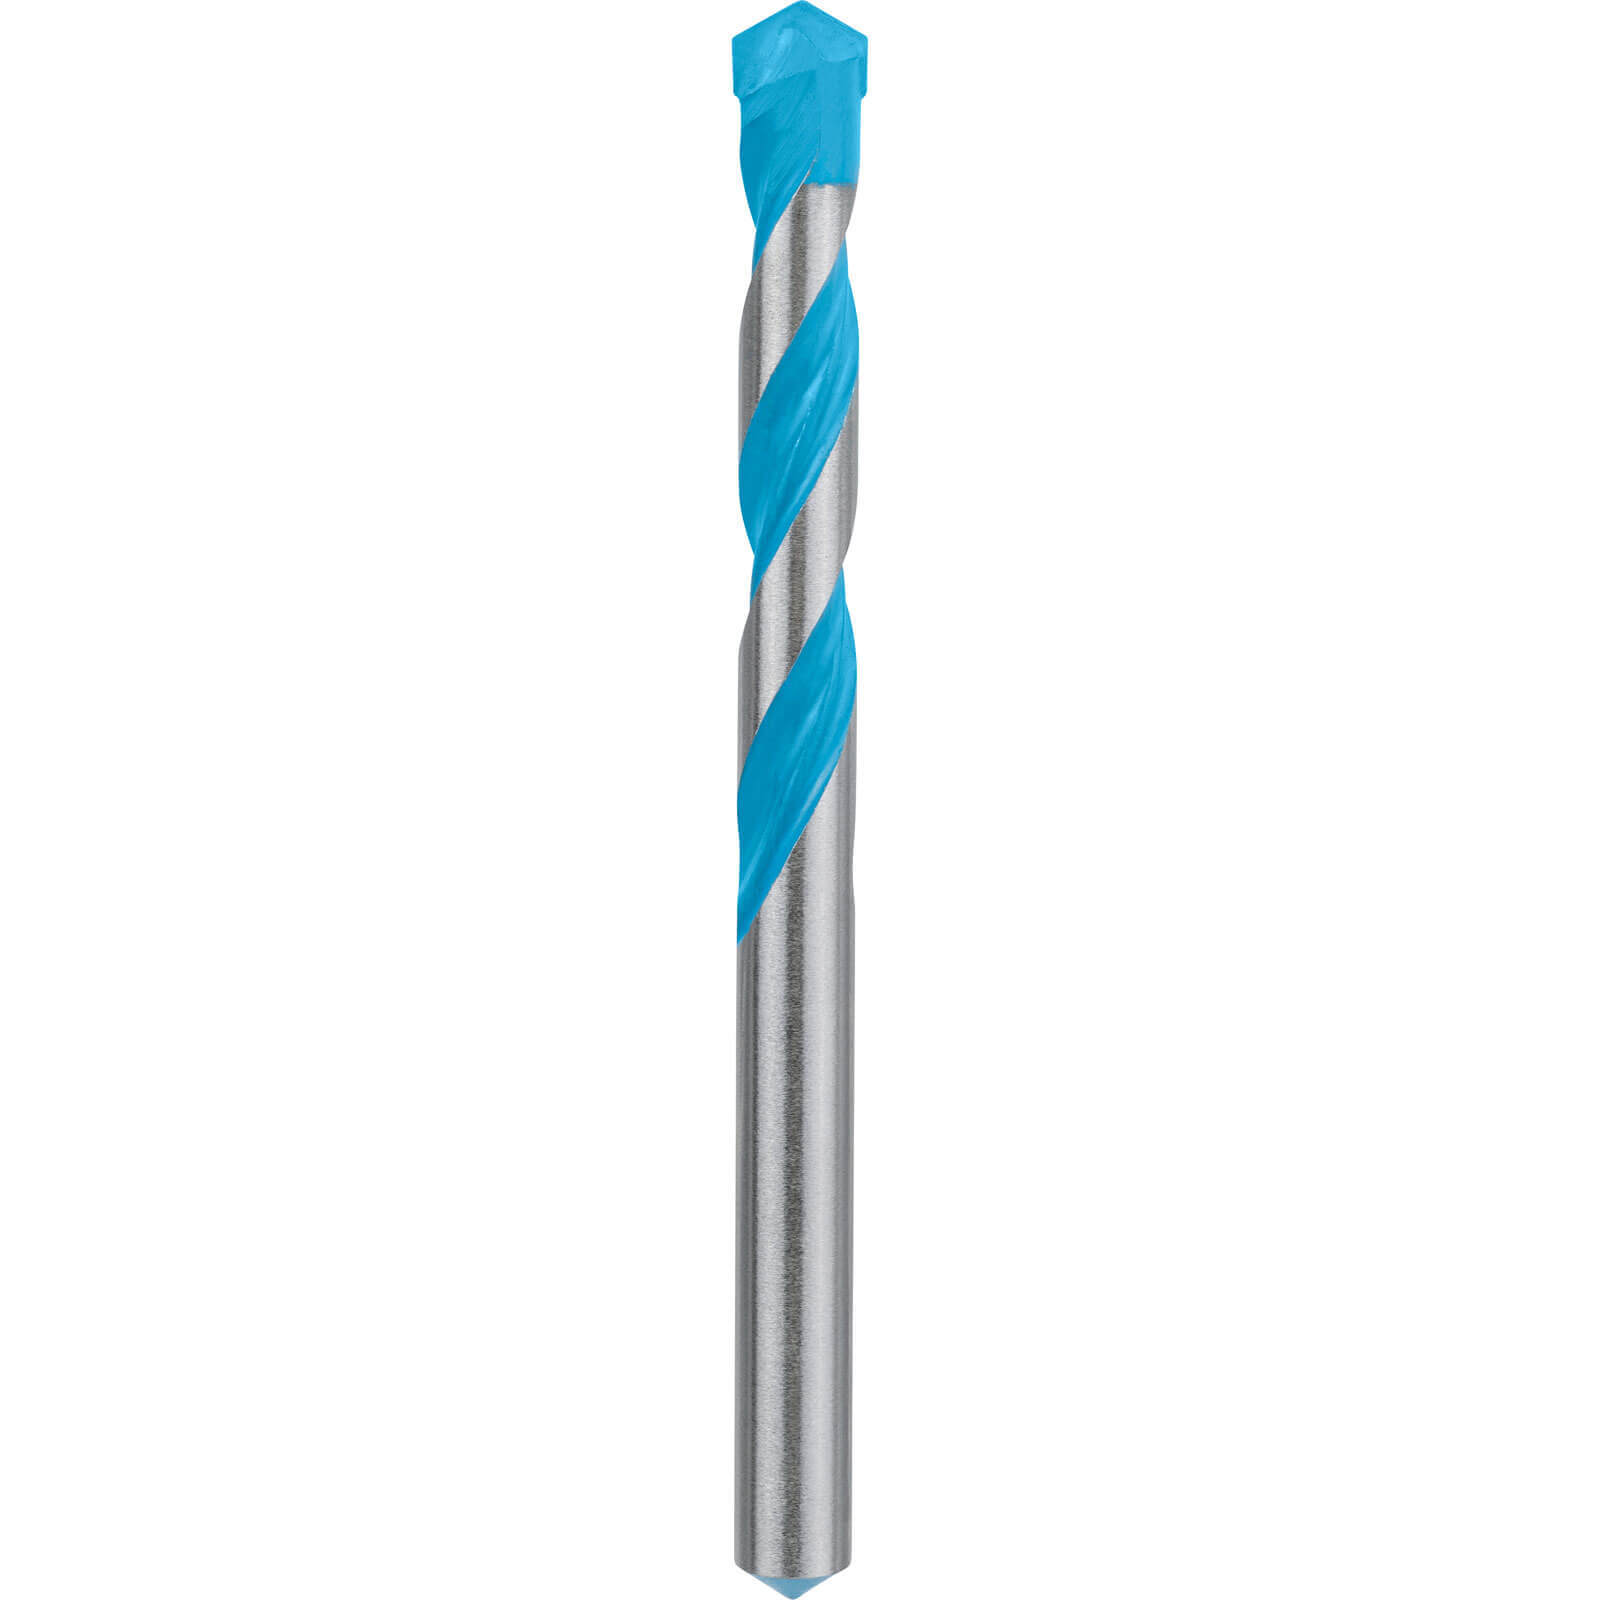 Photo of Bosch Expert Cyl-9 Multi Construction Drill Bit 10mm 120mm Pack Of 1